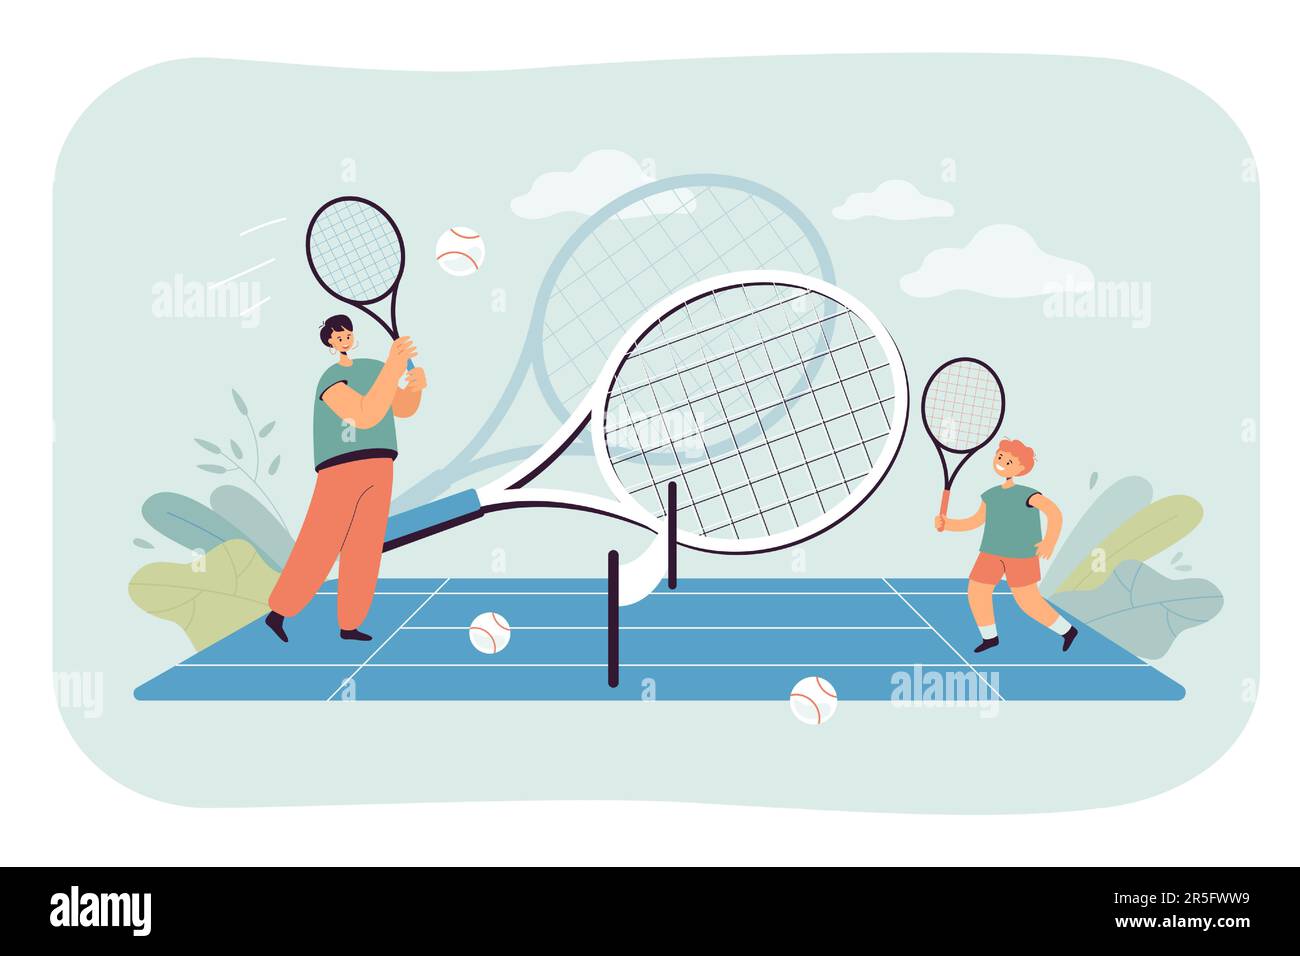 Female coach or mother and boy playing junior tennis together Stock Vector